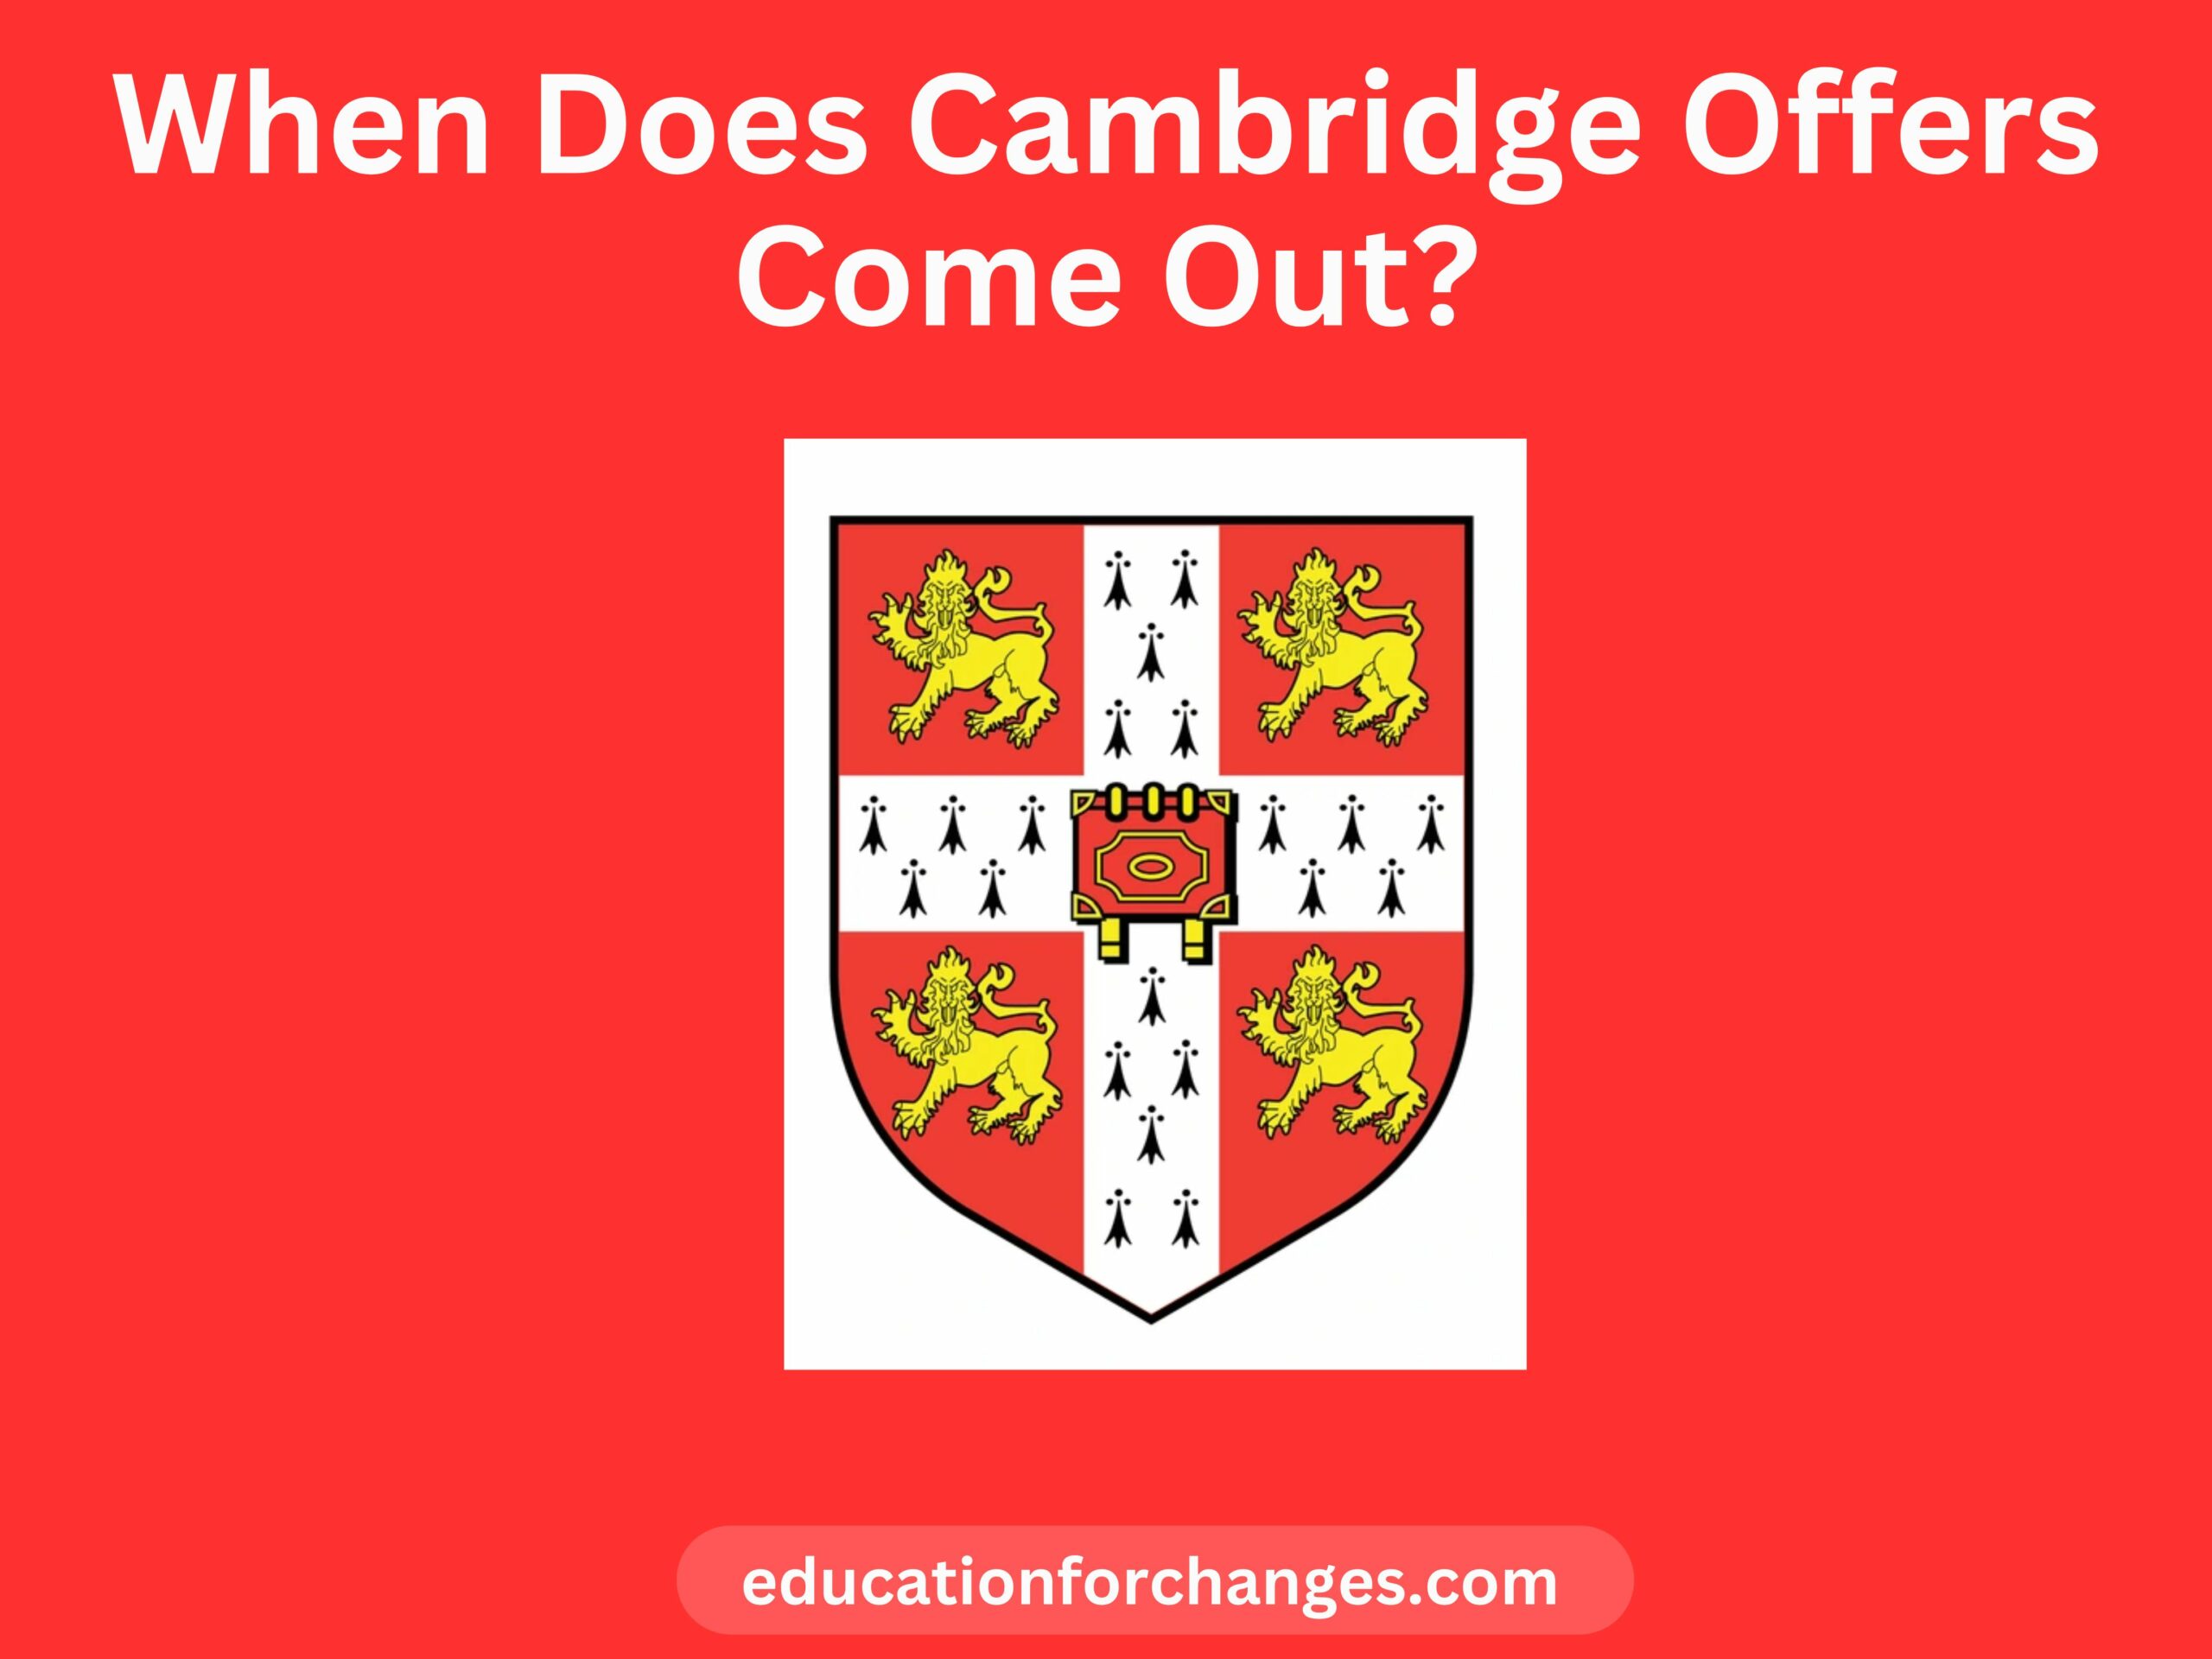 When Does Cambridge Offers Come Out?